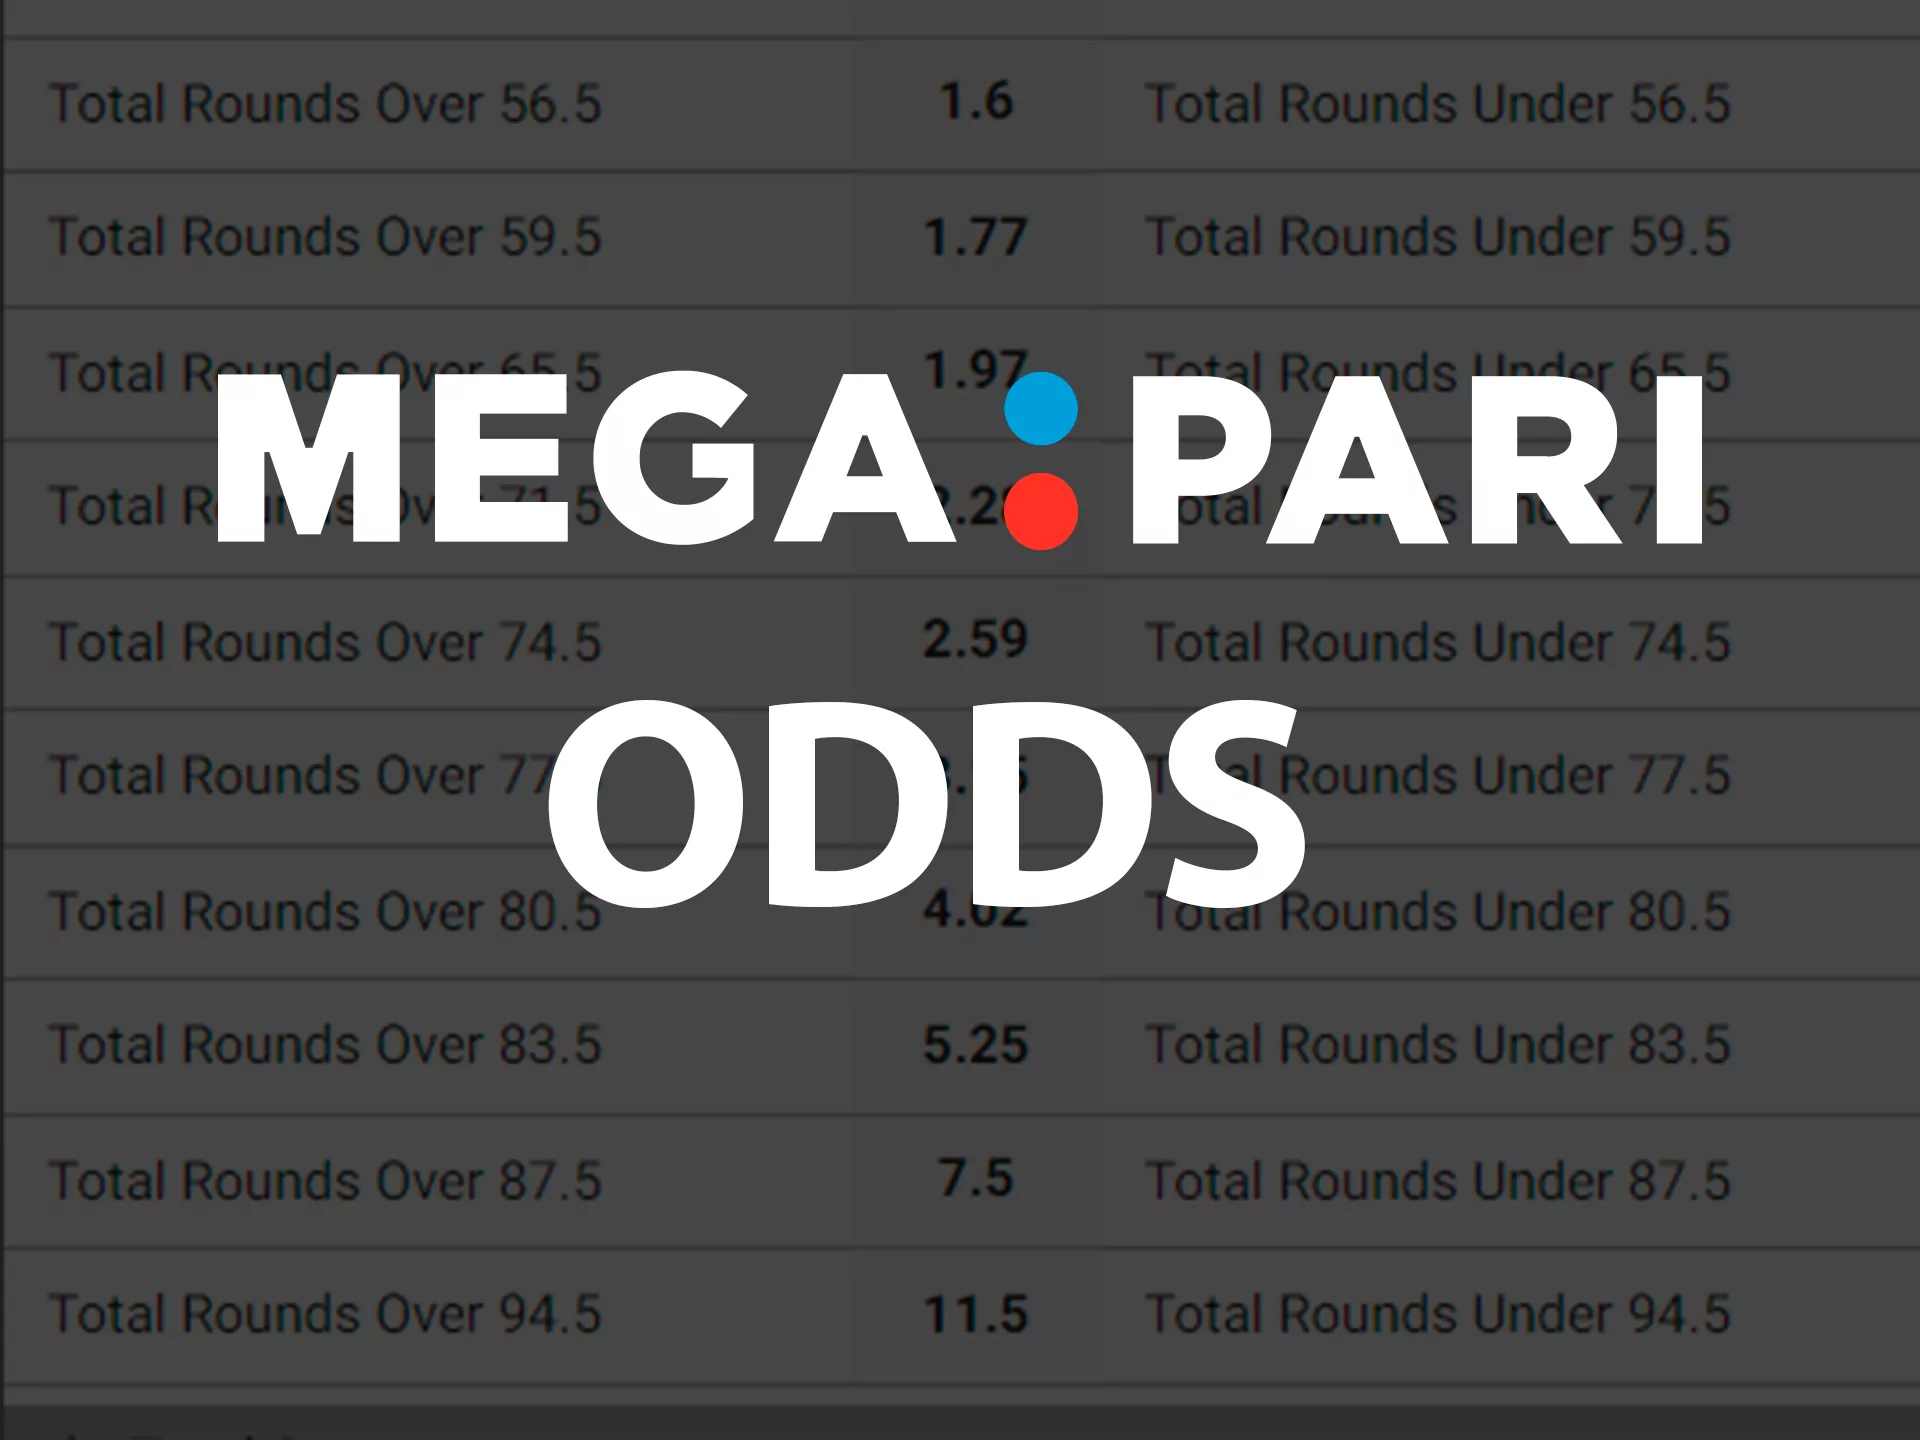 You can find profitable odds on popular events at MegaPari.